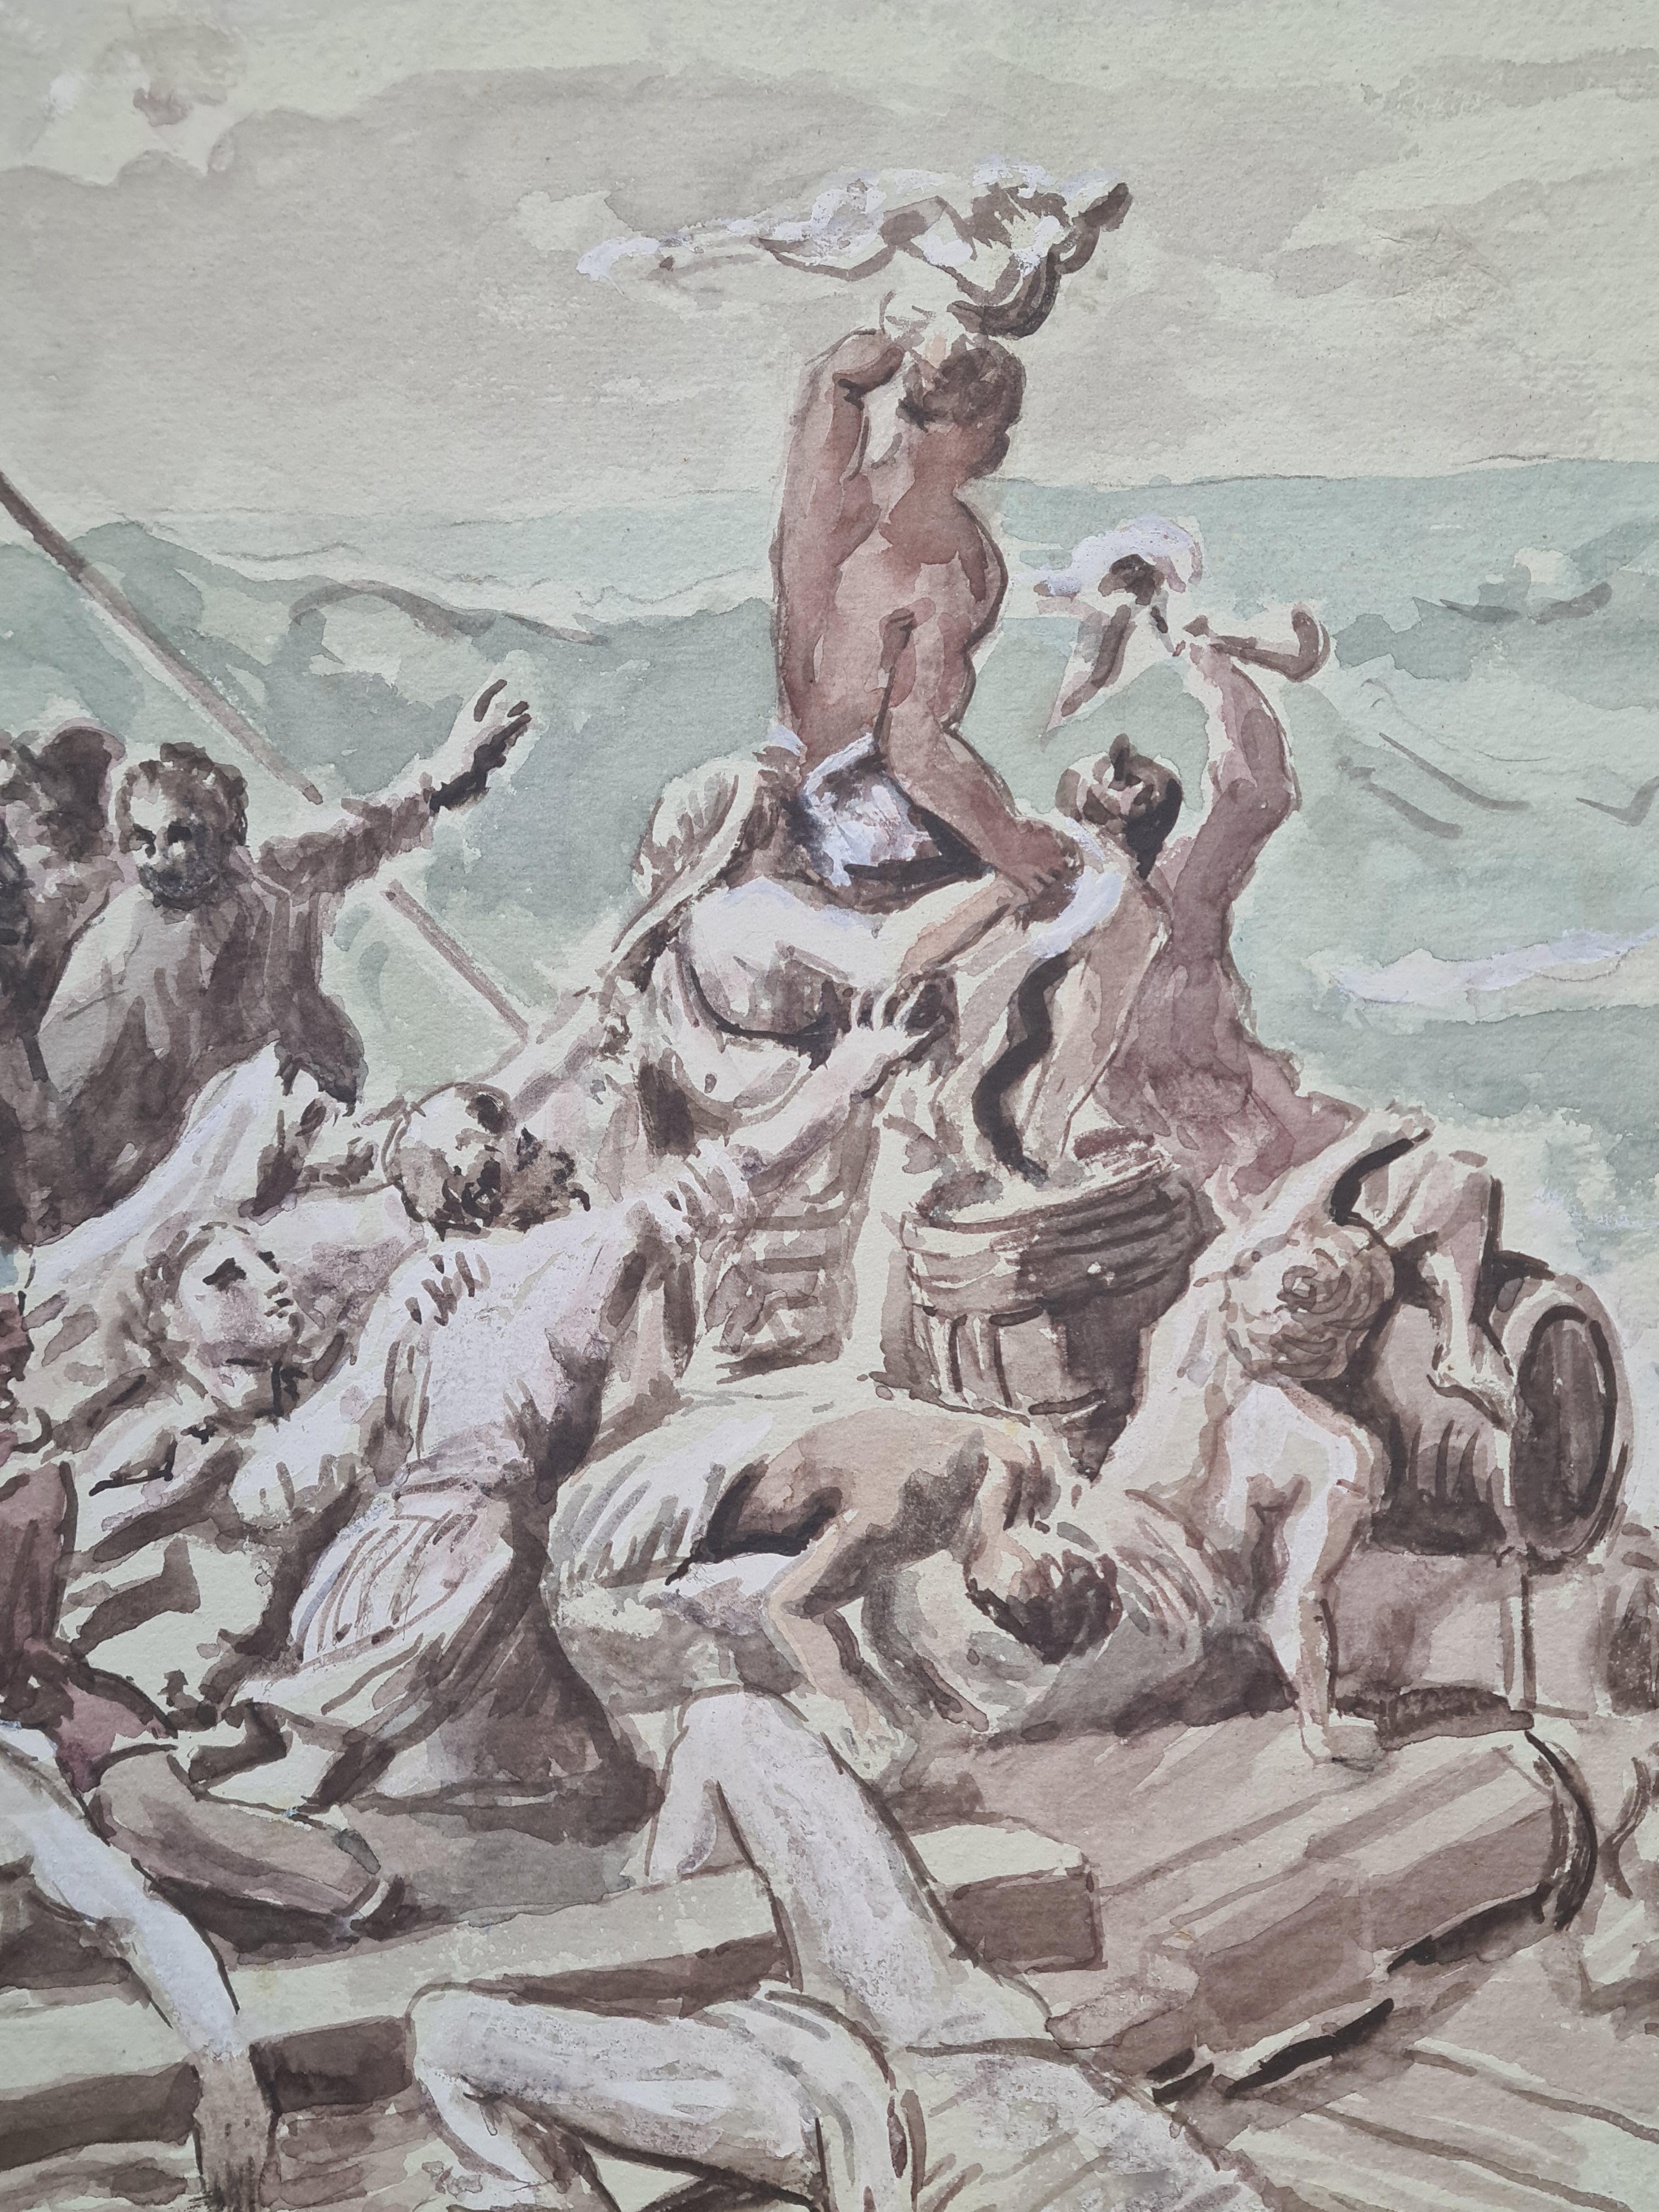 Watercolor Interpretation of the The Raft of the Medusa After Théodore Géricault - Art by Derek Carruthers